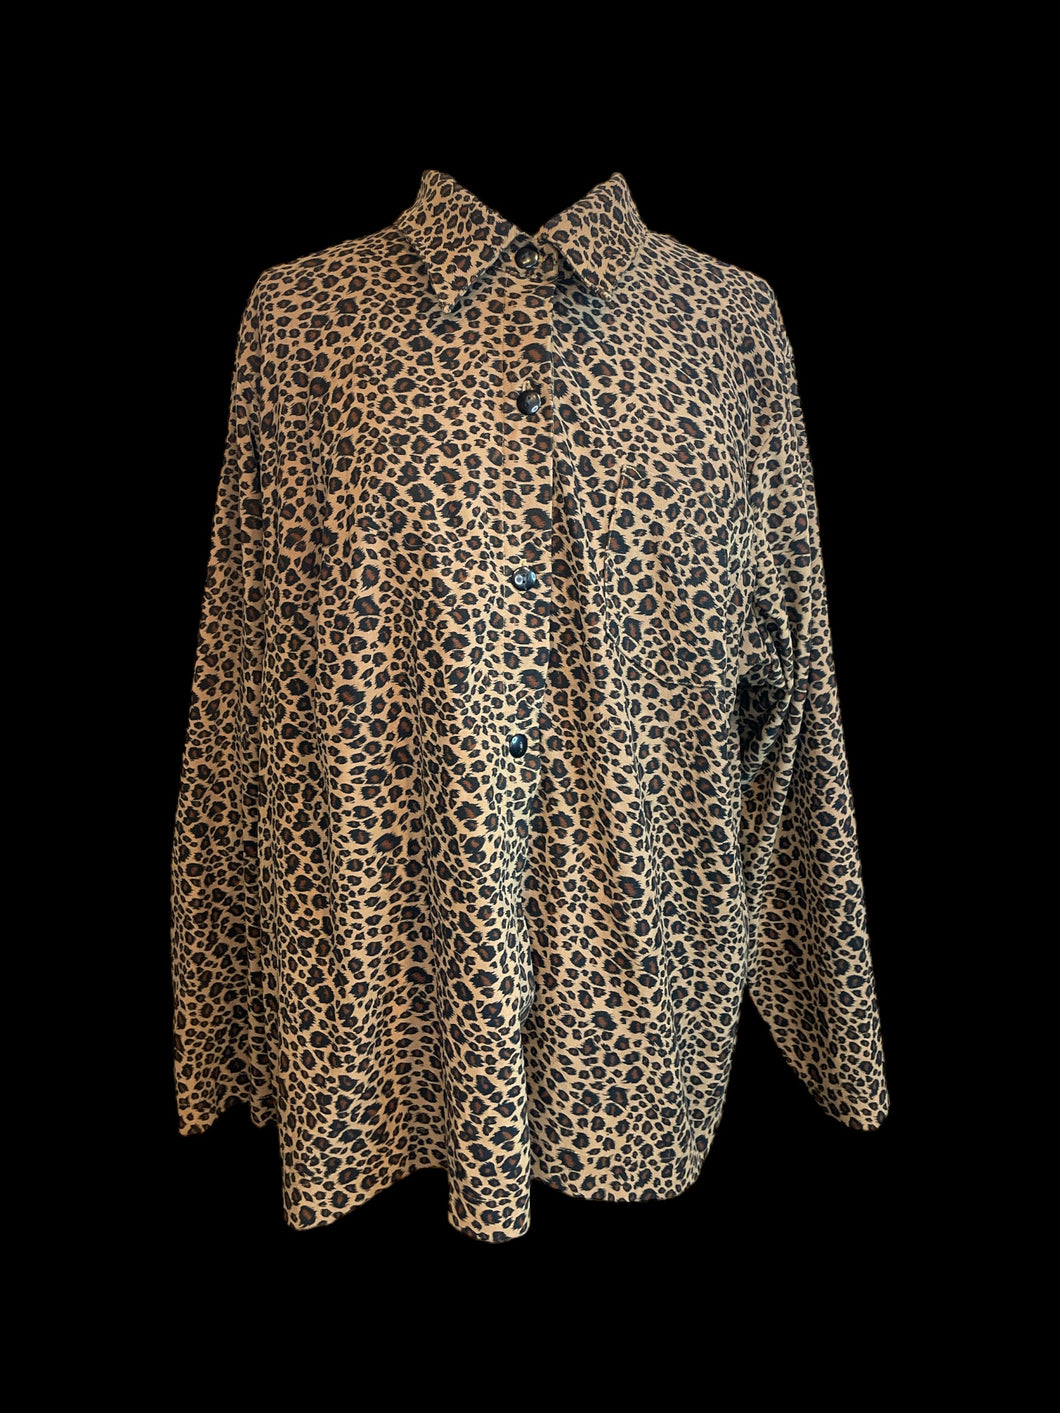 3X Vintage 70s black & brown animal print long sleeve button down top w/ folded collar, & chest pocket